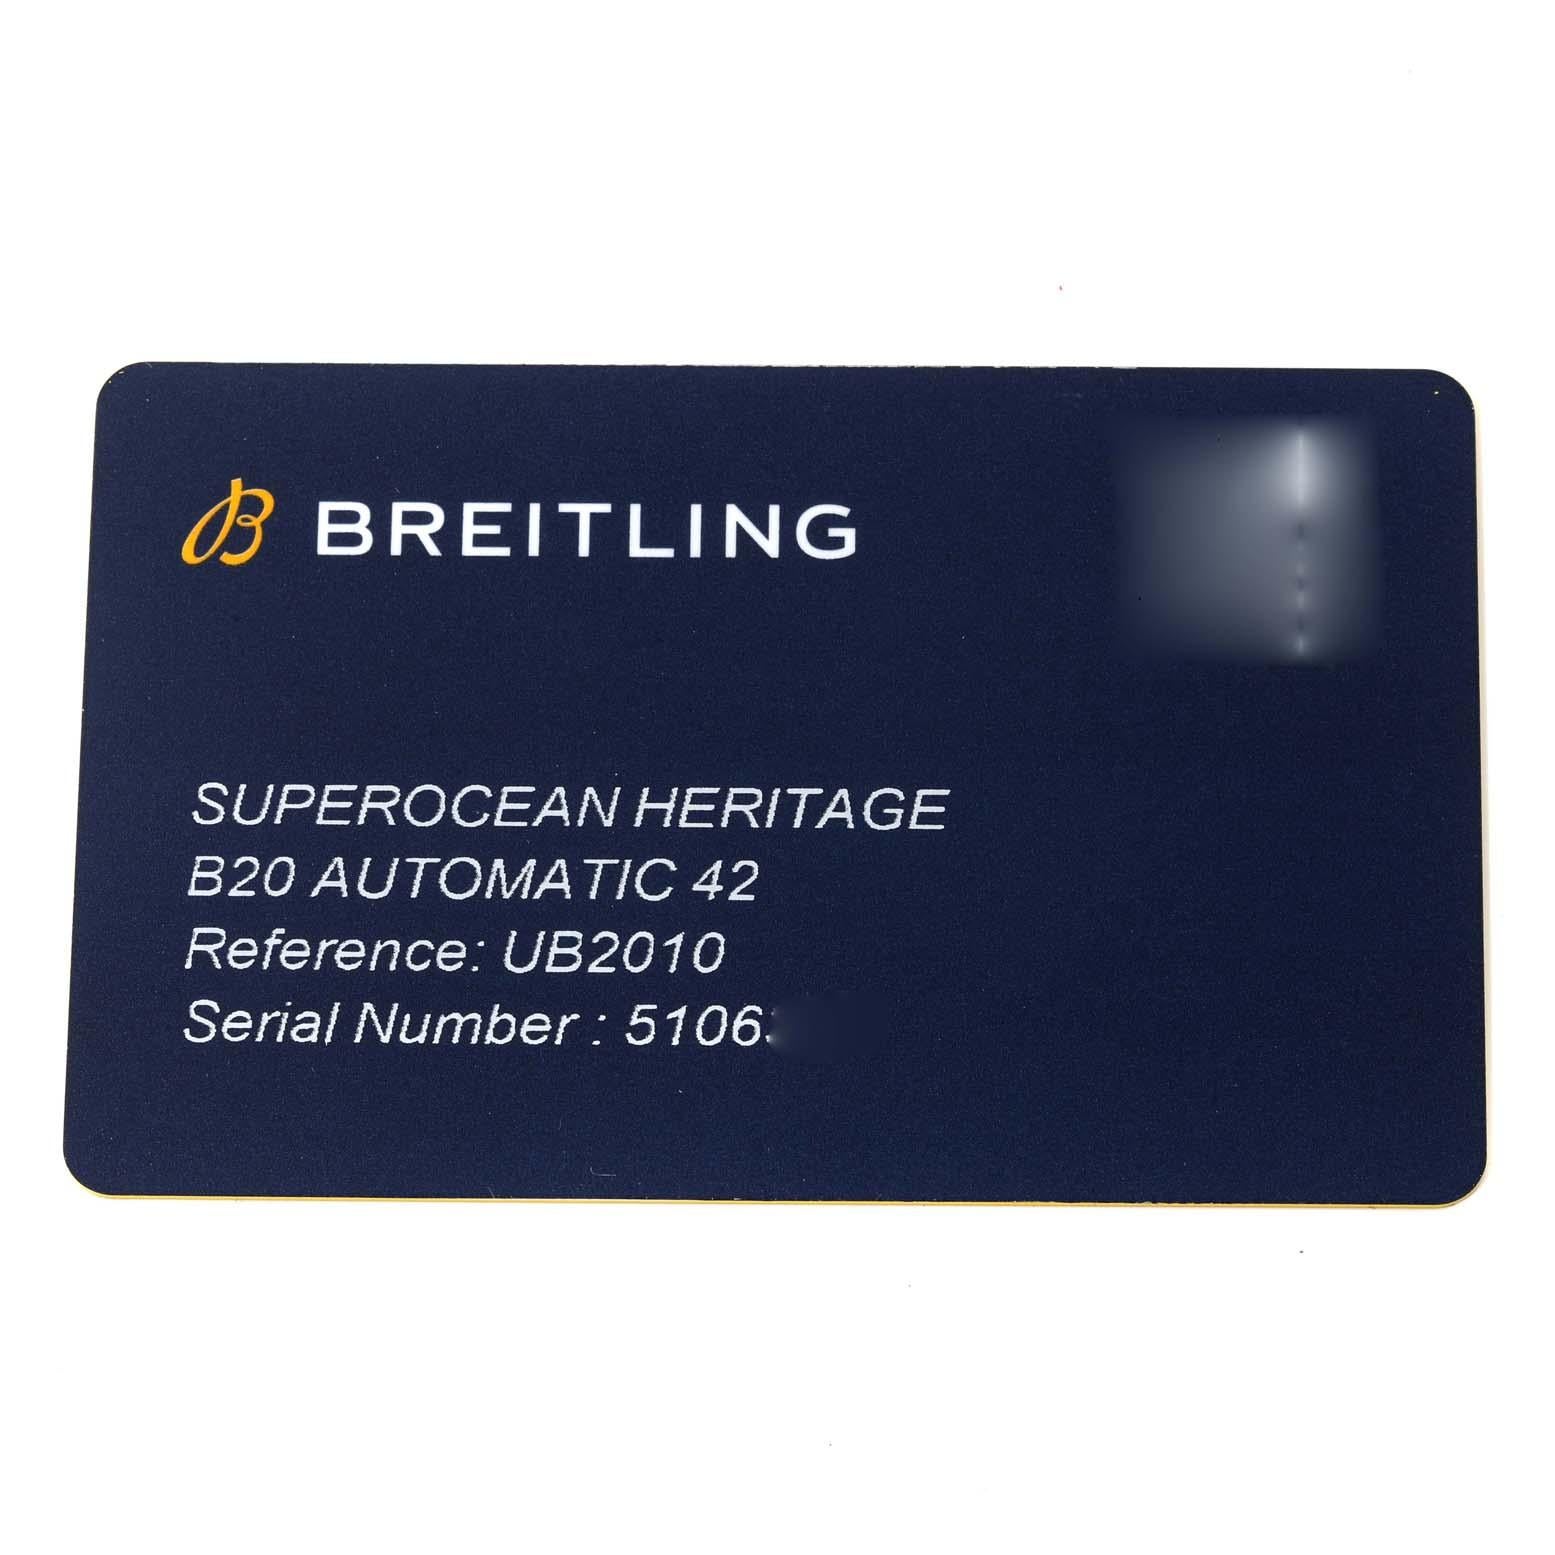 Breitling Superocean Heritage II 42 Steel Rose Gold Mens Watch UB2010 Box Card In Excellent Condition For Sale In Atlanta, GA